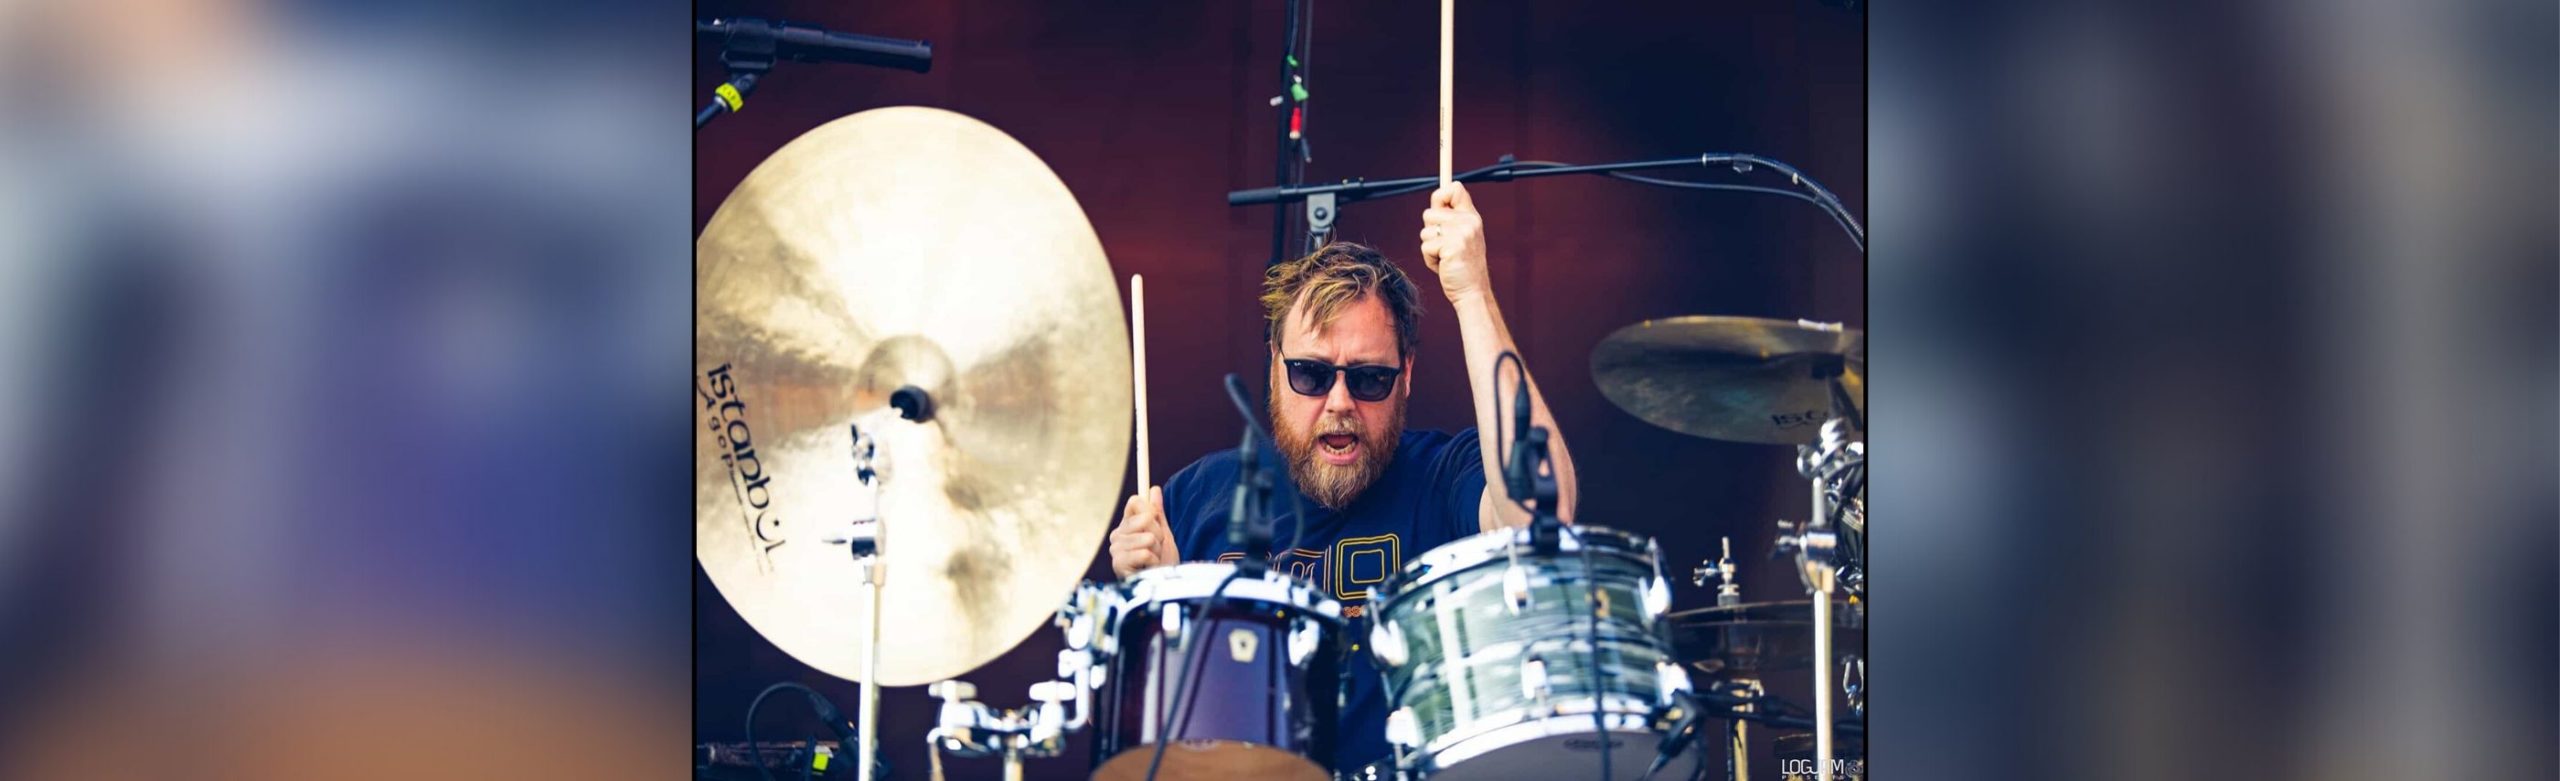 WATCH: Joe Russo’s Almost Dead Invites You to “RAD Night in America” Webcast Image